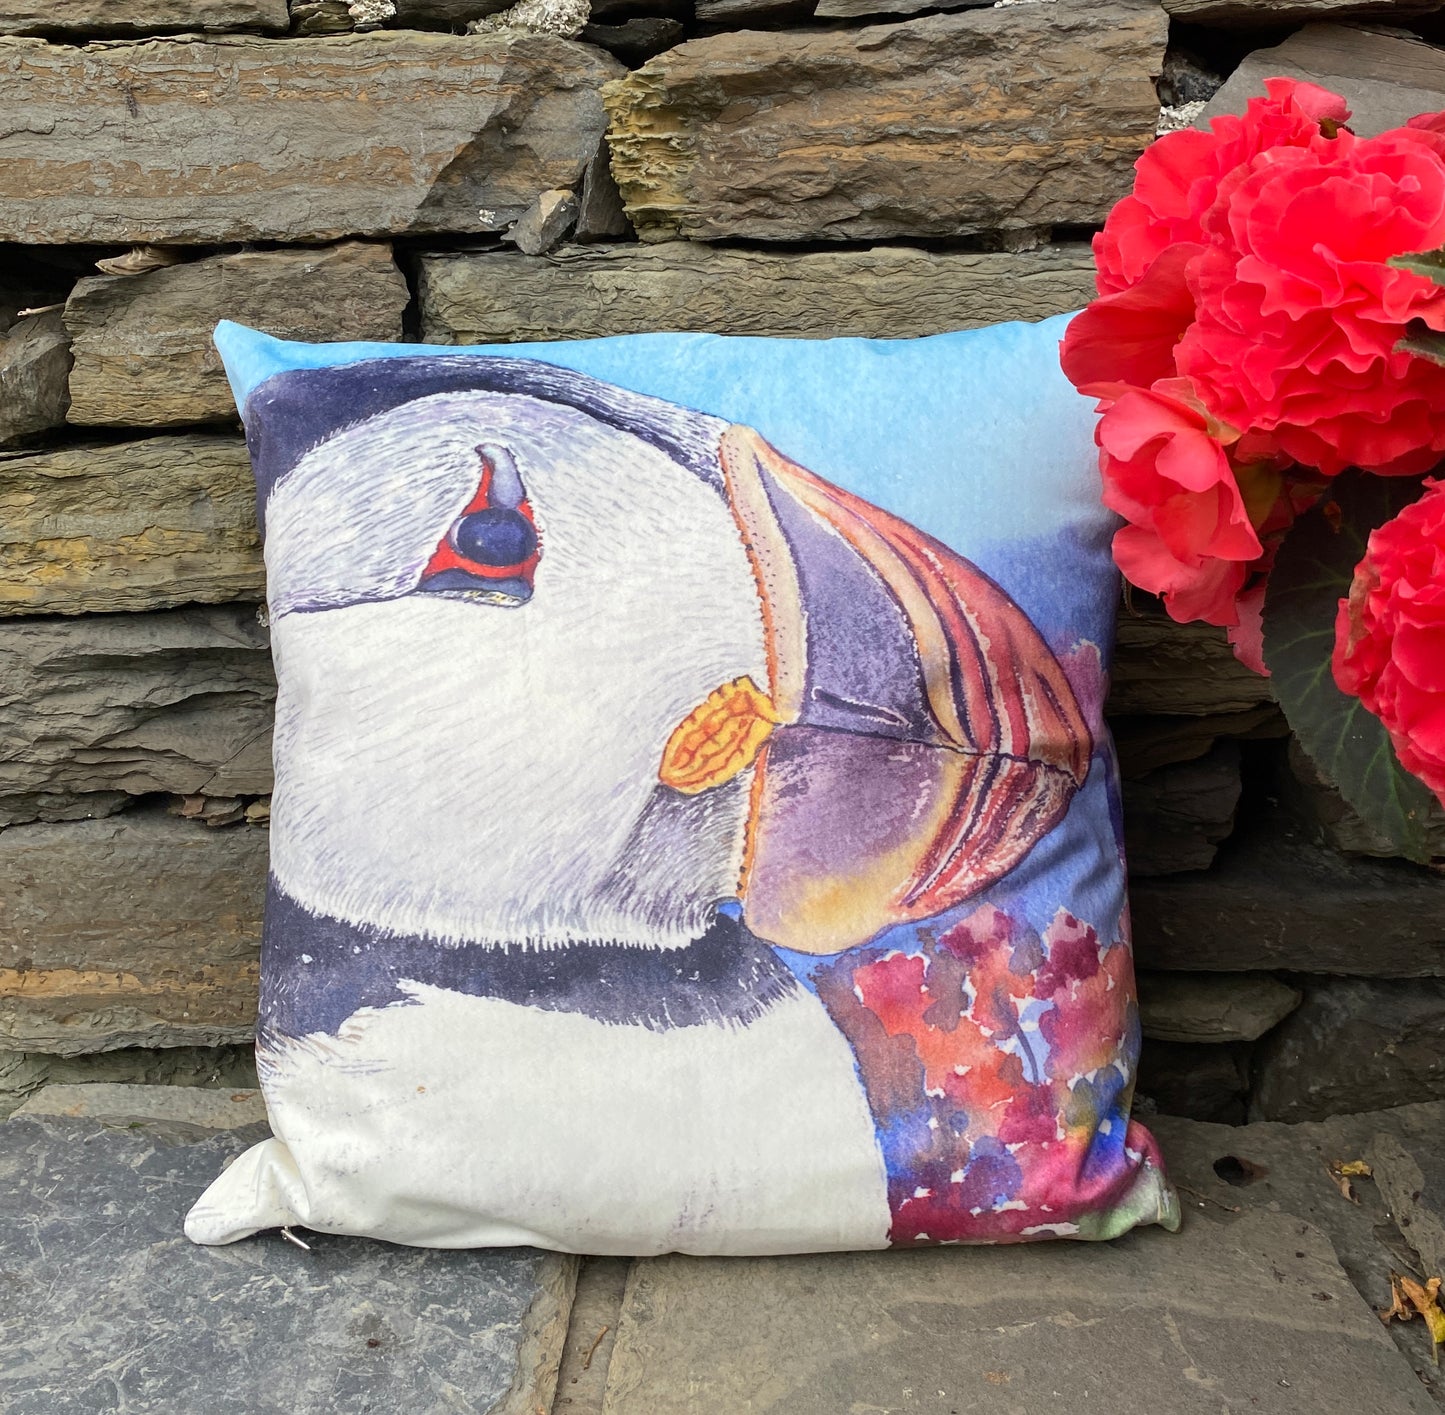 A beautiful velvet cushion printed with a watercolour image of a puffin's head by Orkney artist Jane Glue, Scotland